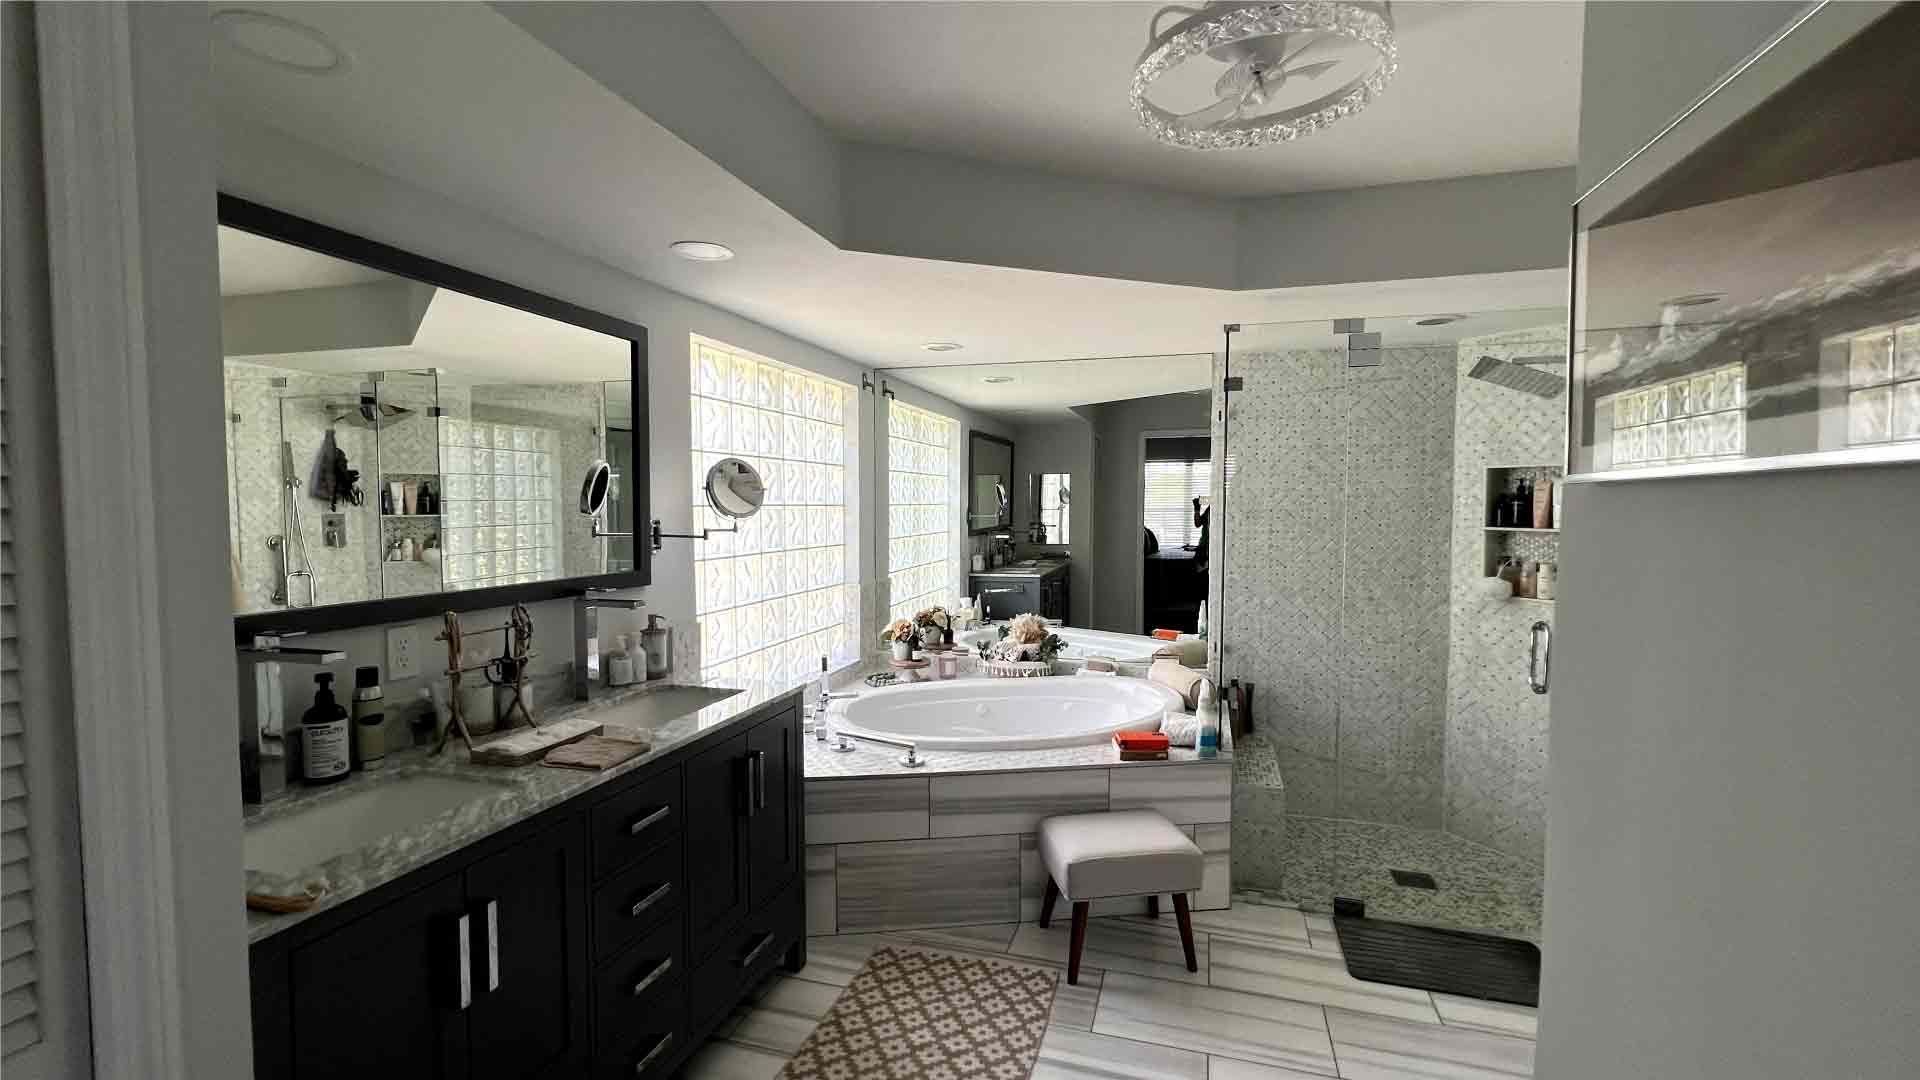 Bathroom cleaning - Deep cleaning in Cape Coral by Goldmillio - Mar 28